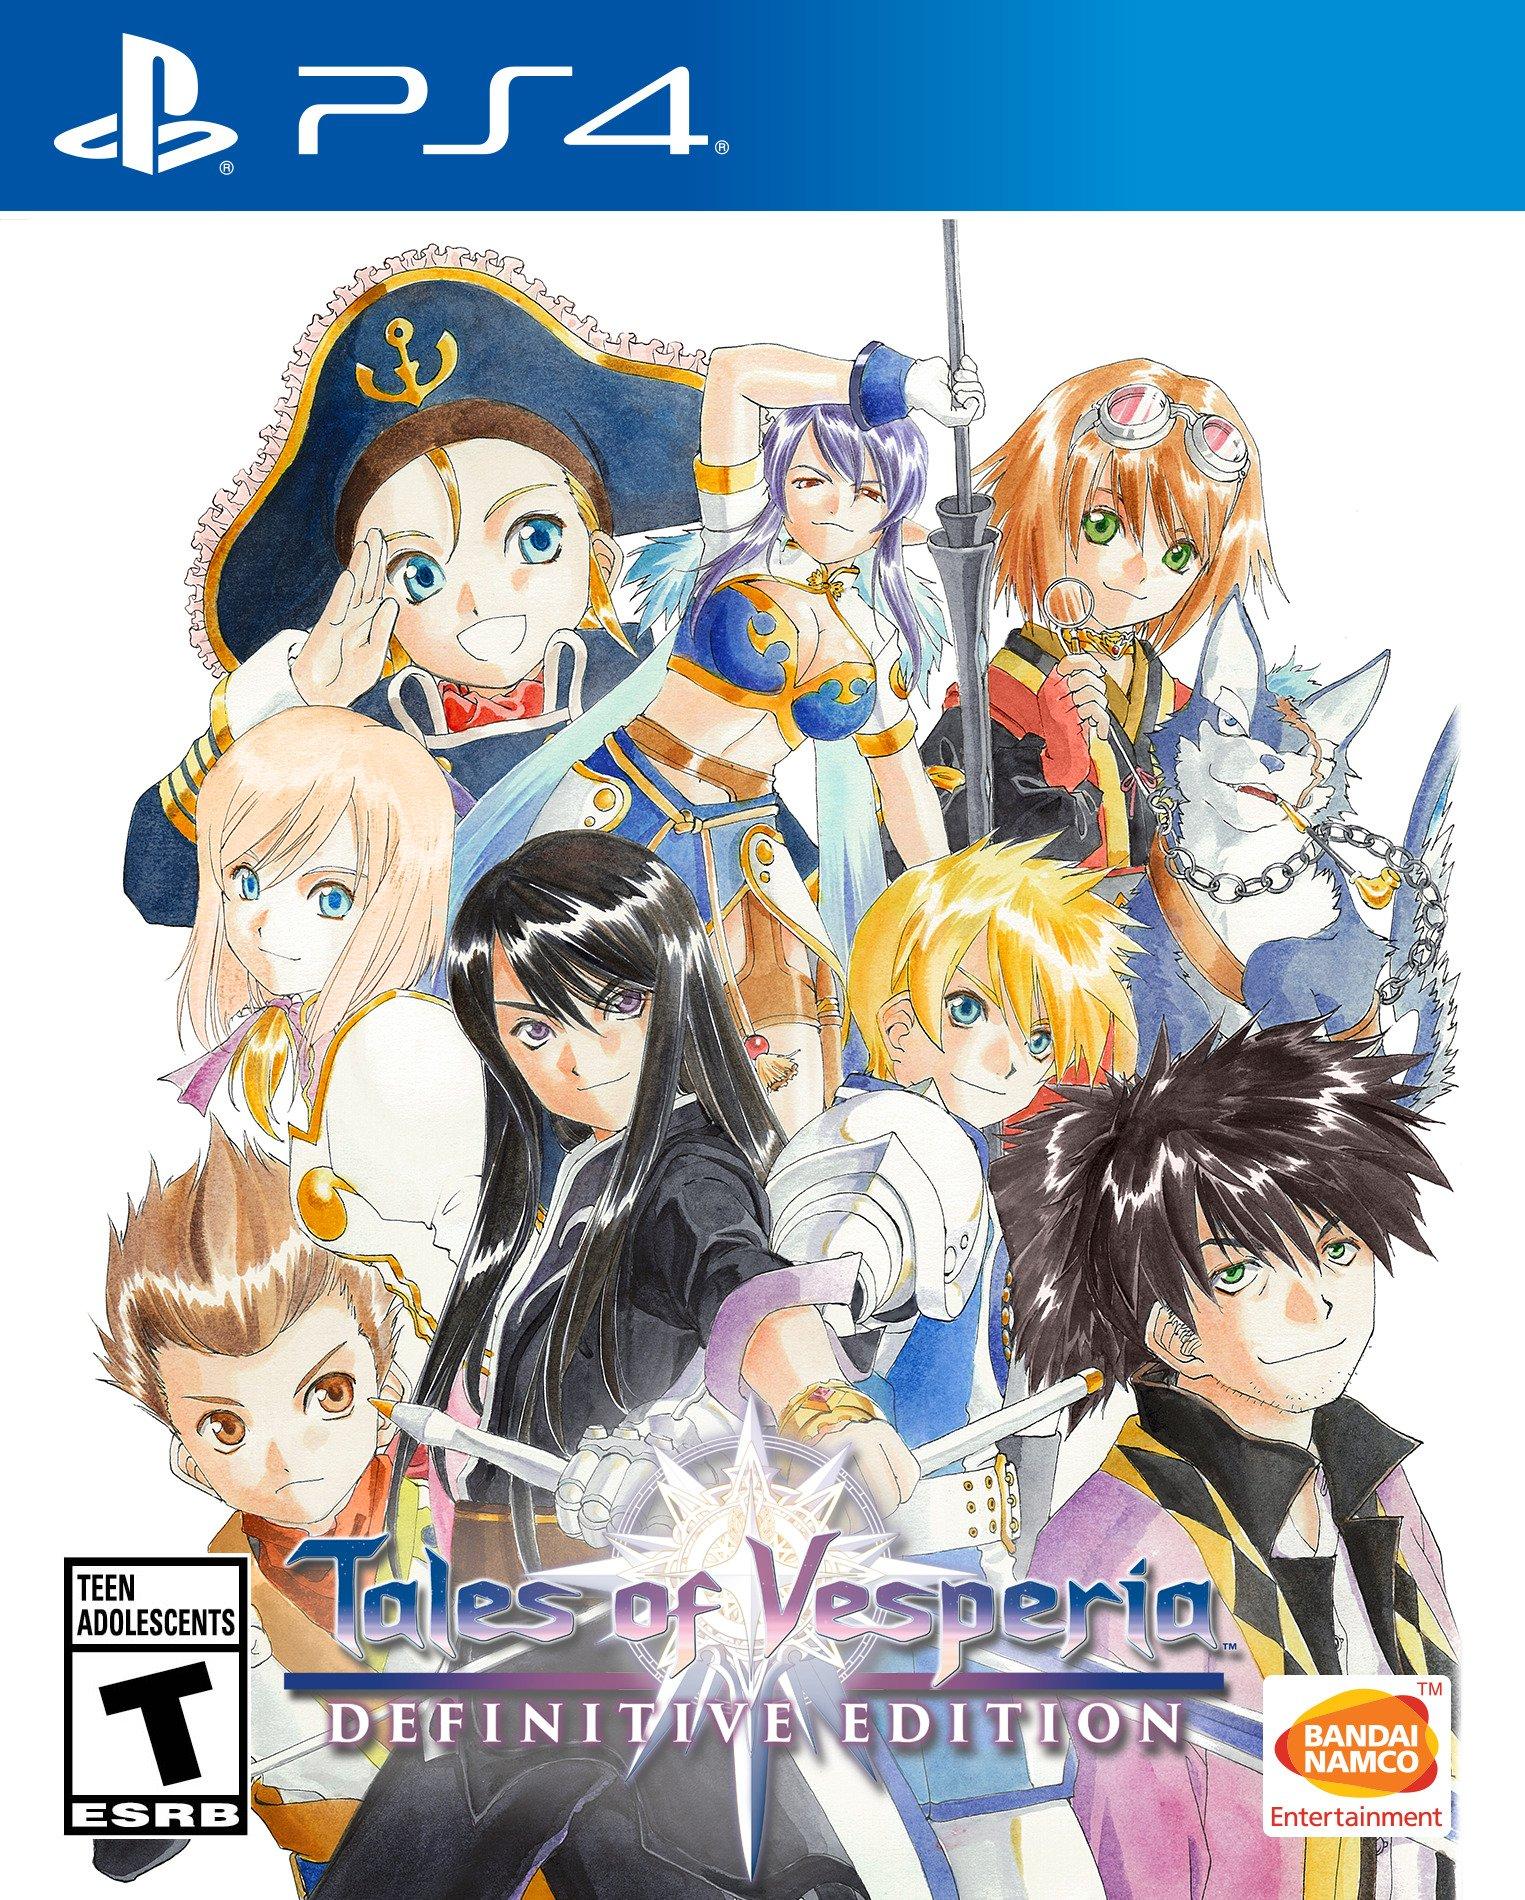 tales of xillia on ps4